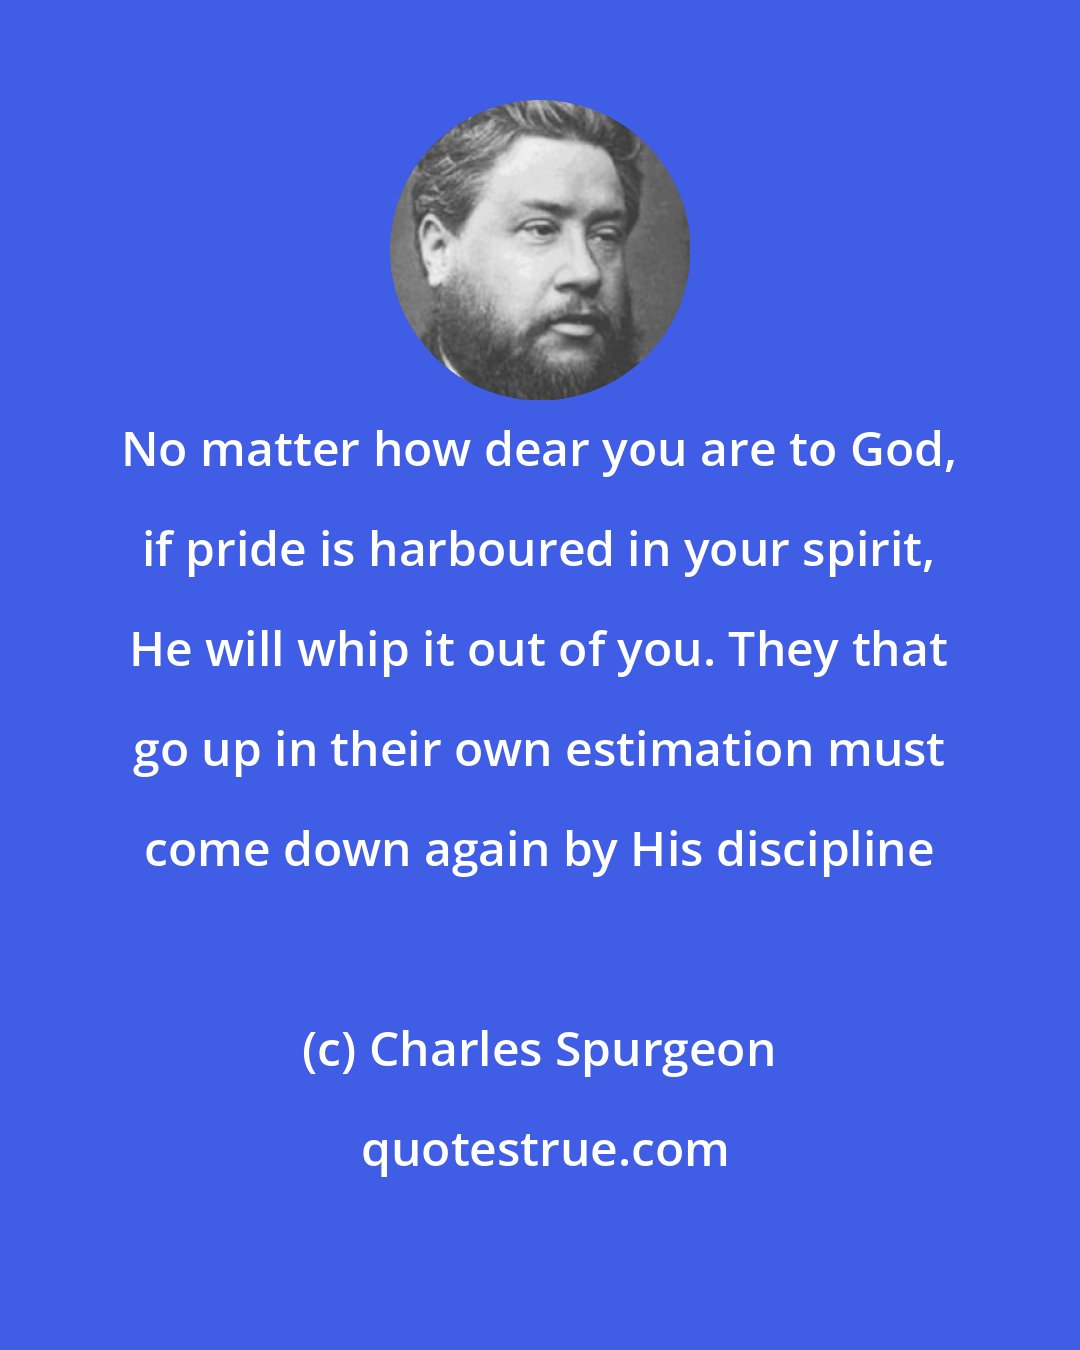 Charles Spurgeon: No matter how dear you are to God, if pride is harboured in your spirit, He will whip it out of you. They that go up in their own estimation must come down again by His discipline